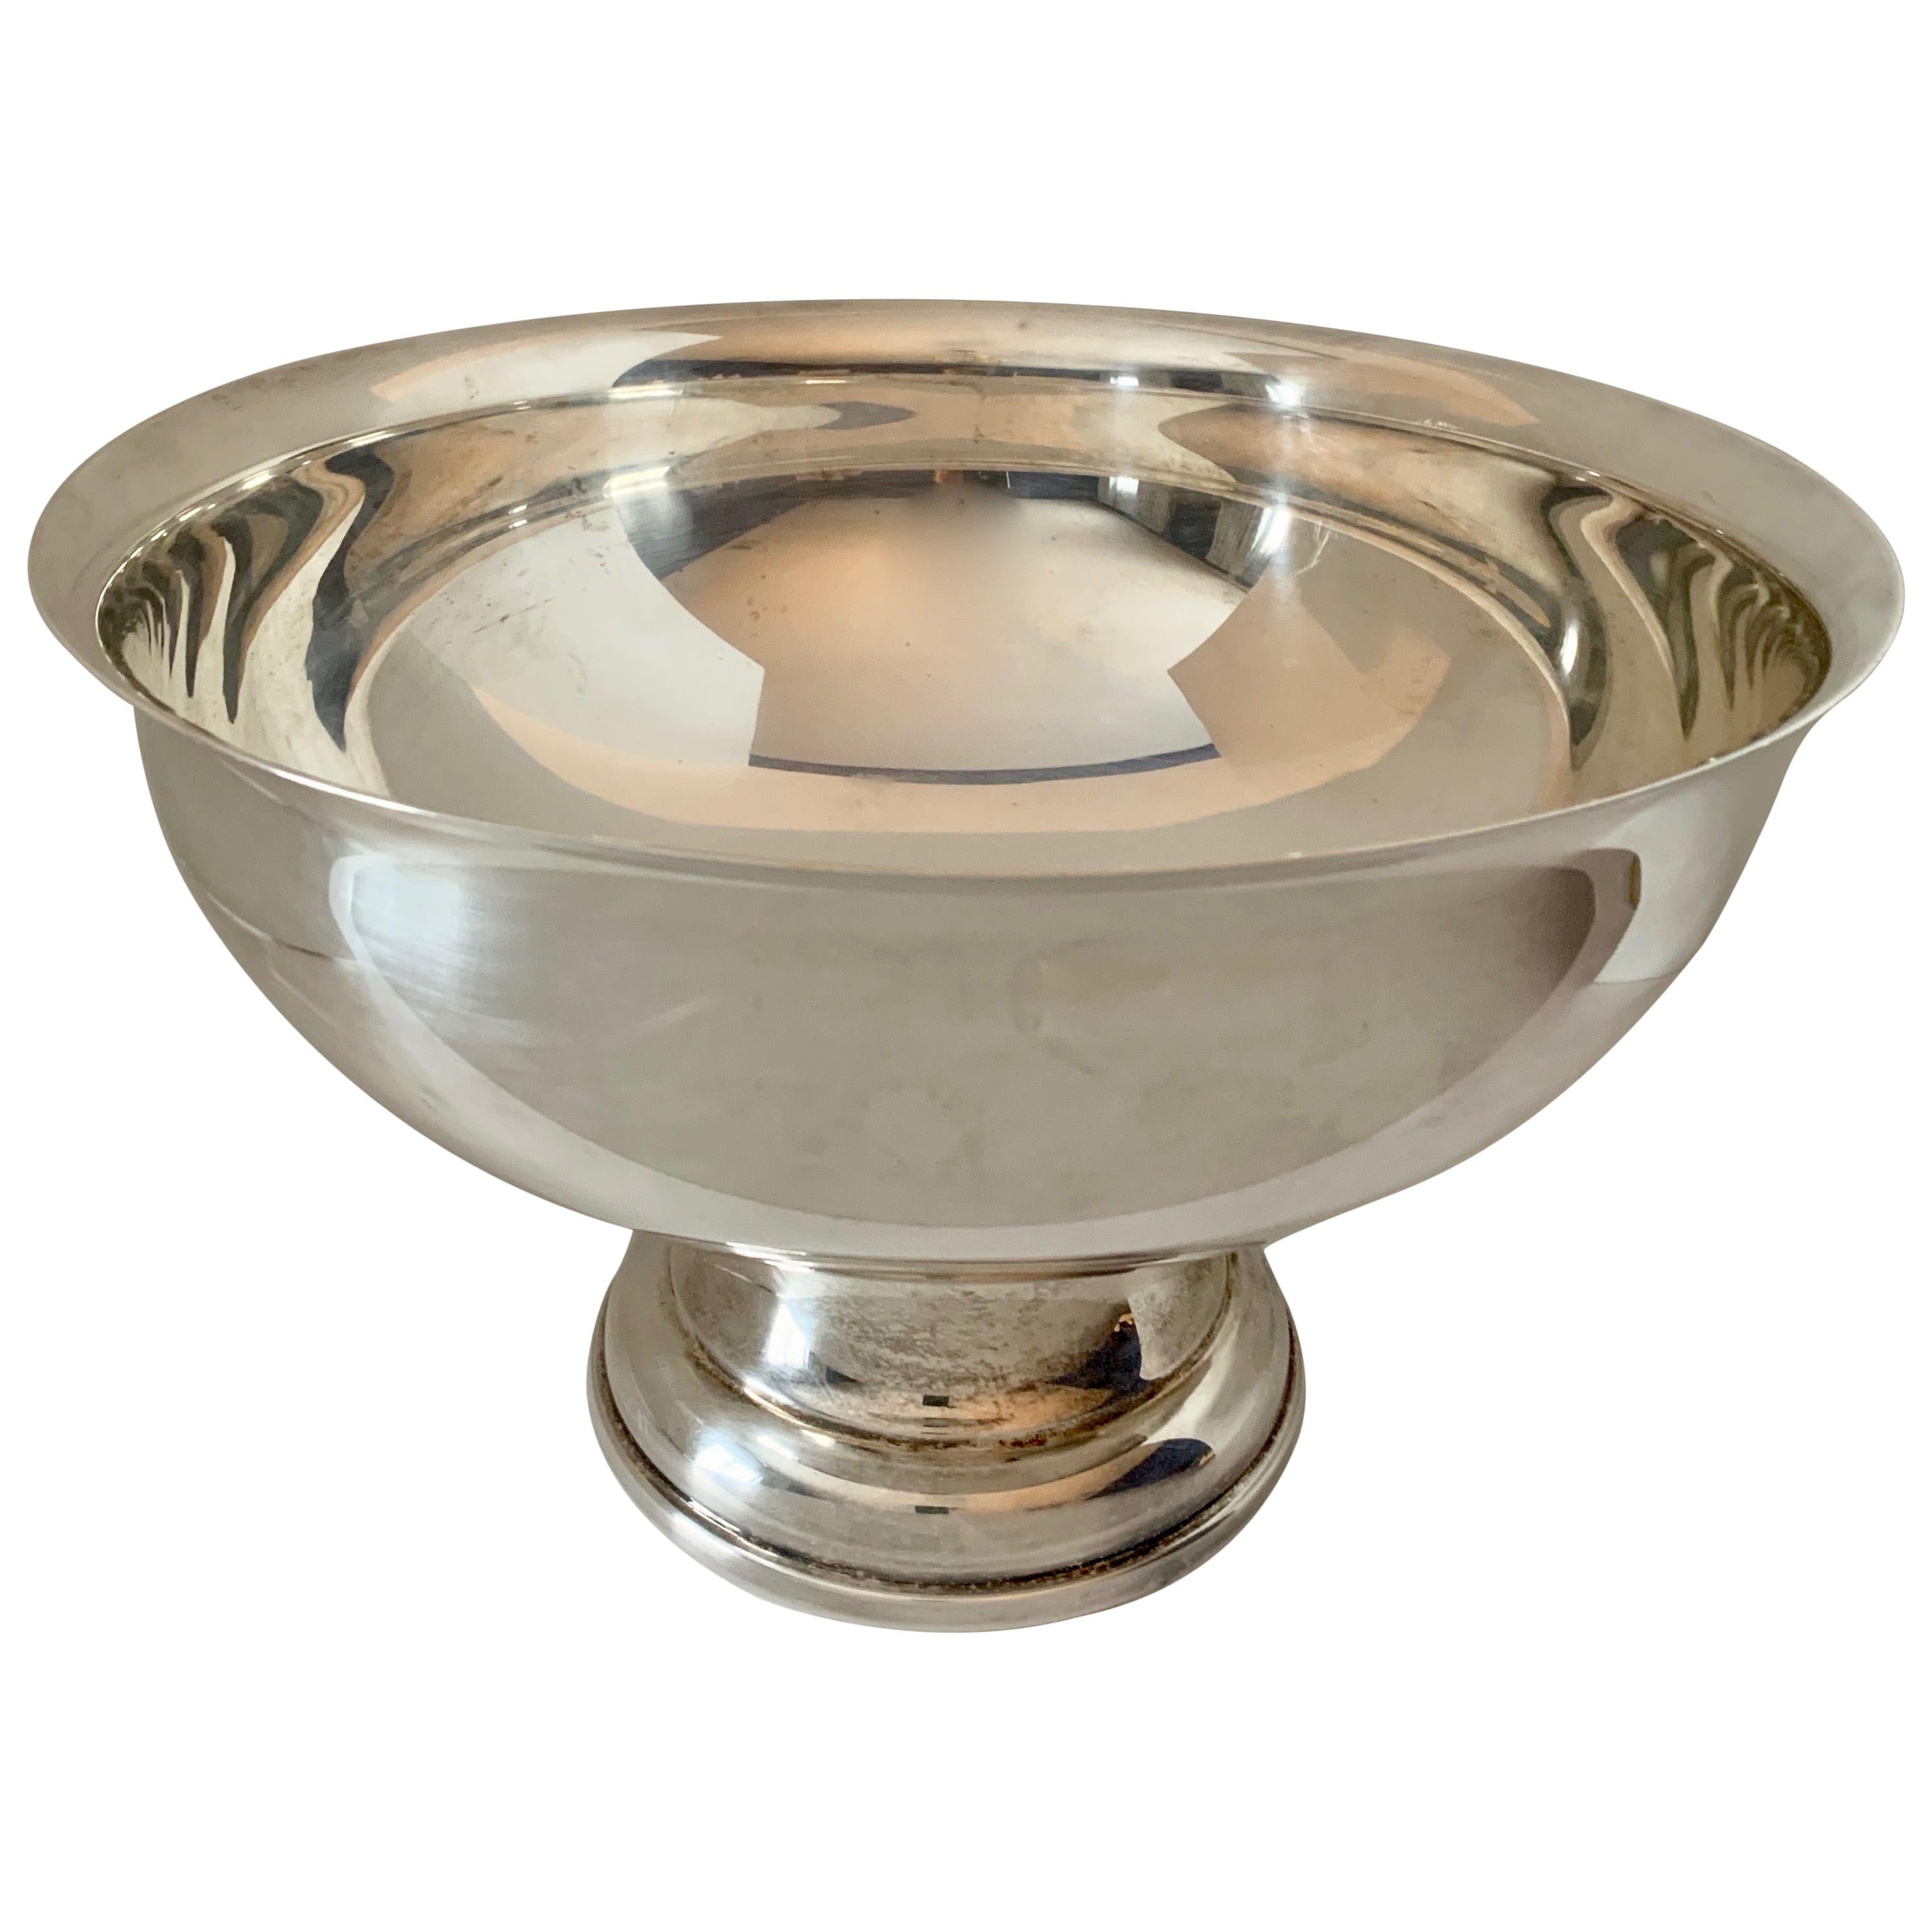 Large Silver Footed Bowl Centerpiece Punch Bowl